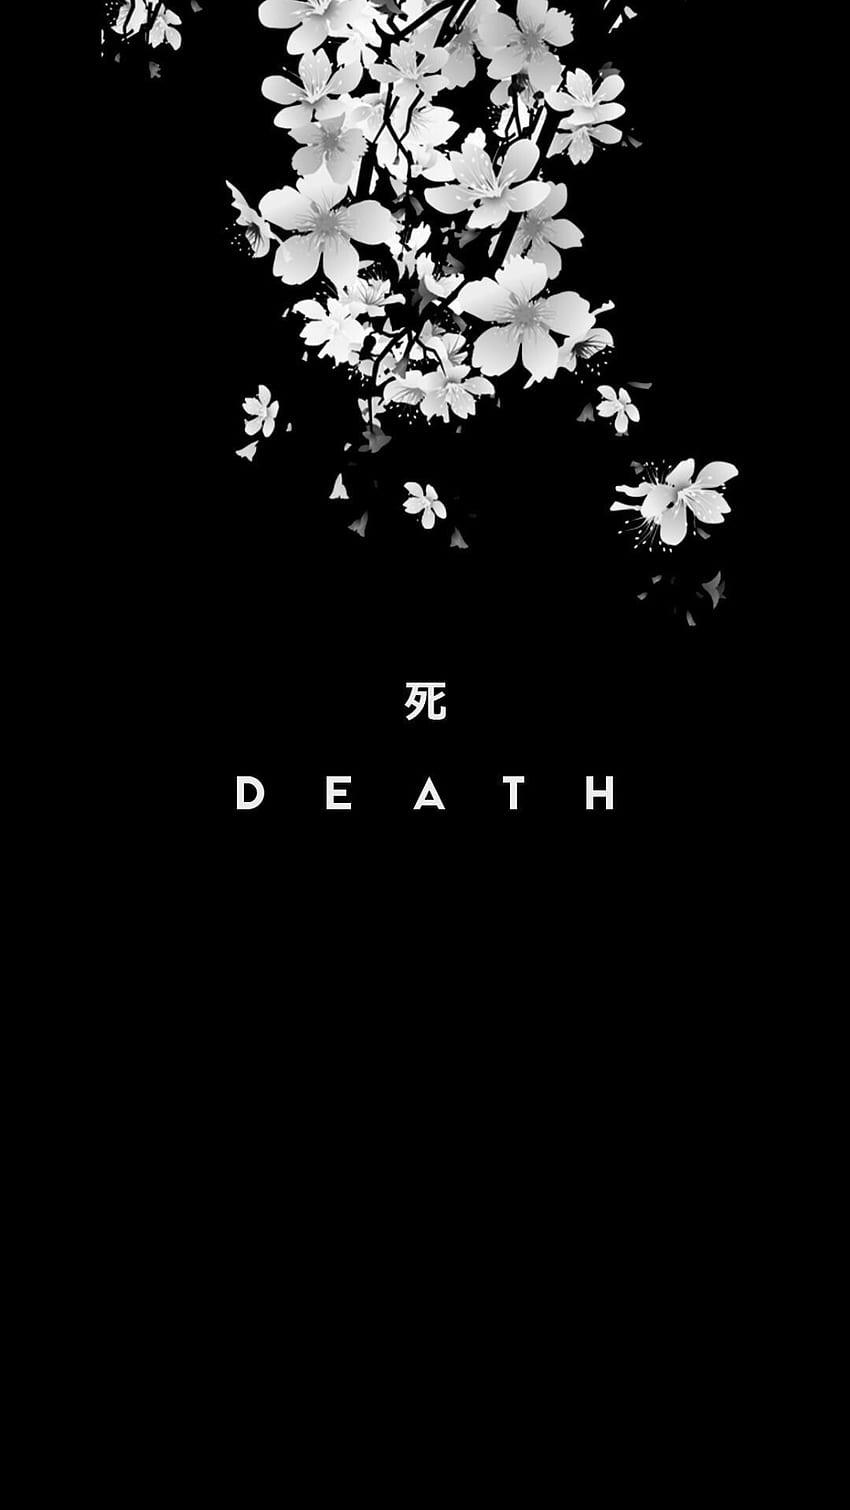 Black aesthetic wallpaper with Death written in Japanese. - 3D